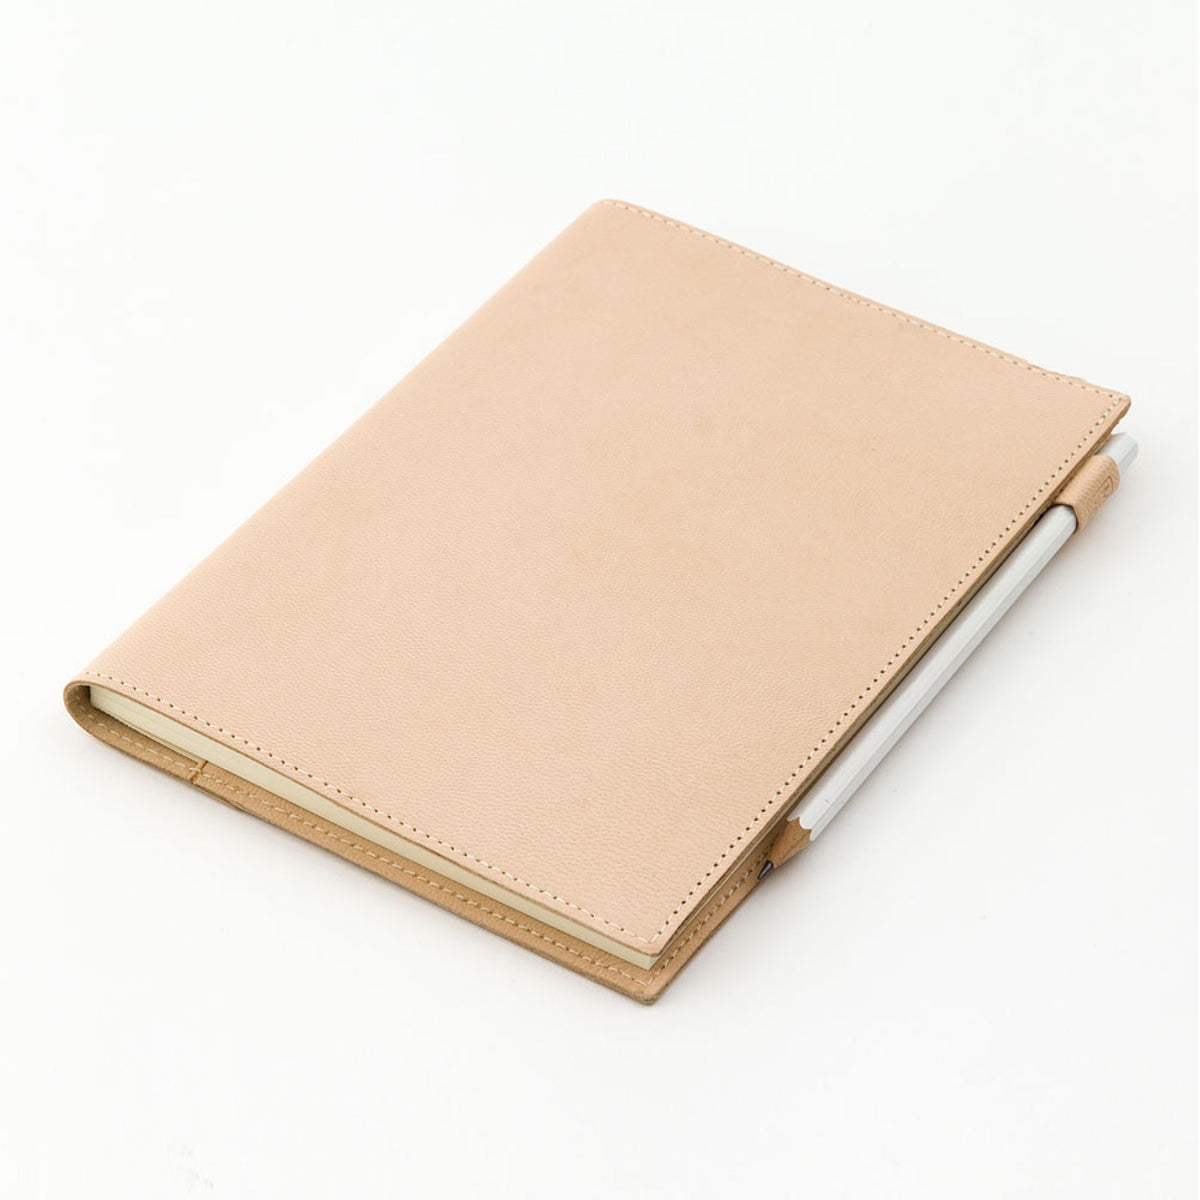 Midori - Notebook Cover - Goat Leather - A5